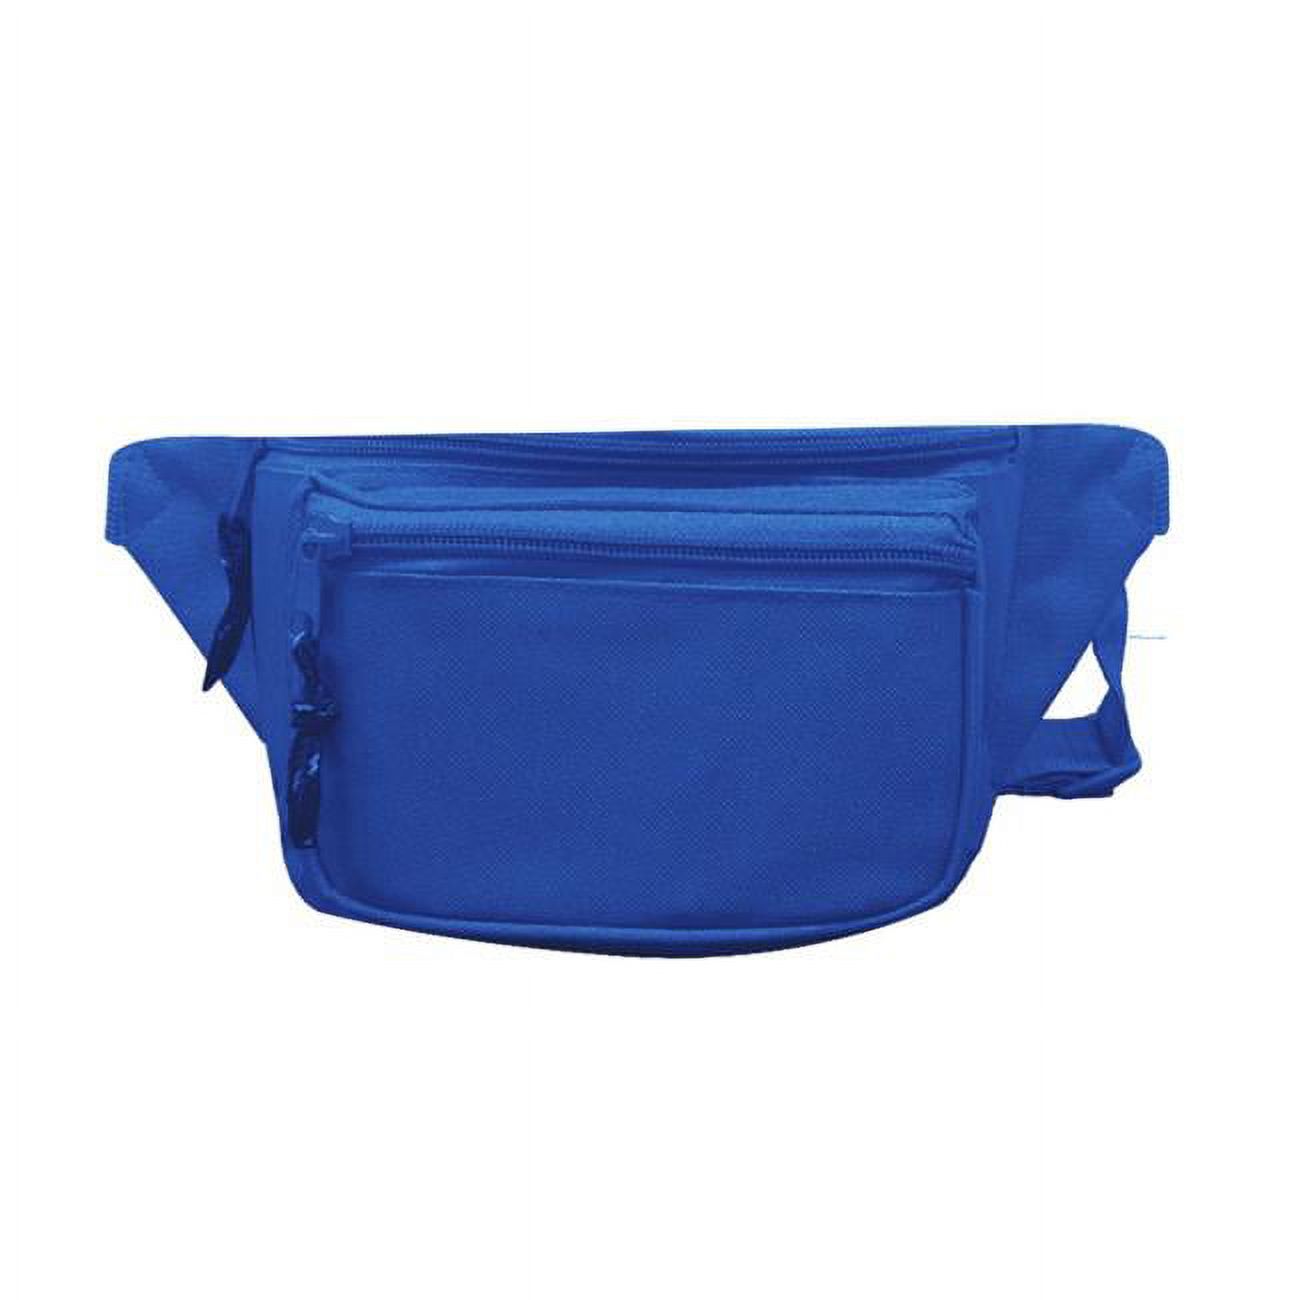 Deluxe 3 Pockets Fanny Pack&#44; Royal - Case of 72 - image 1 of 1